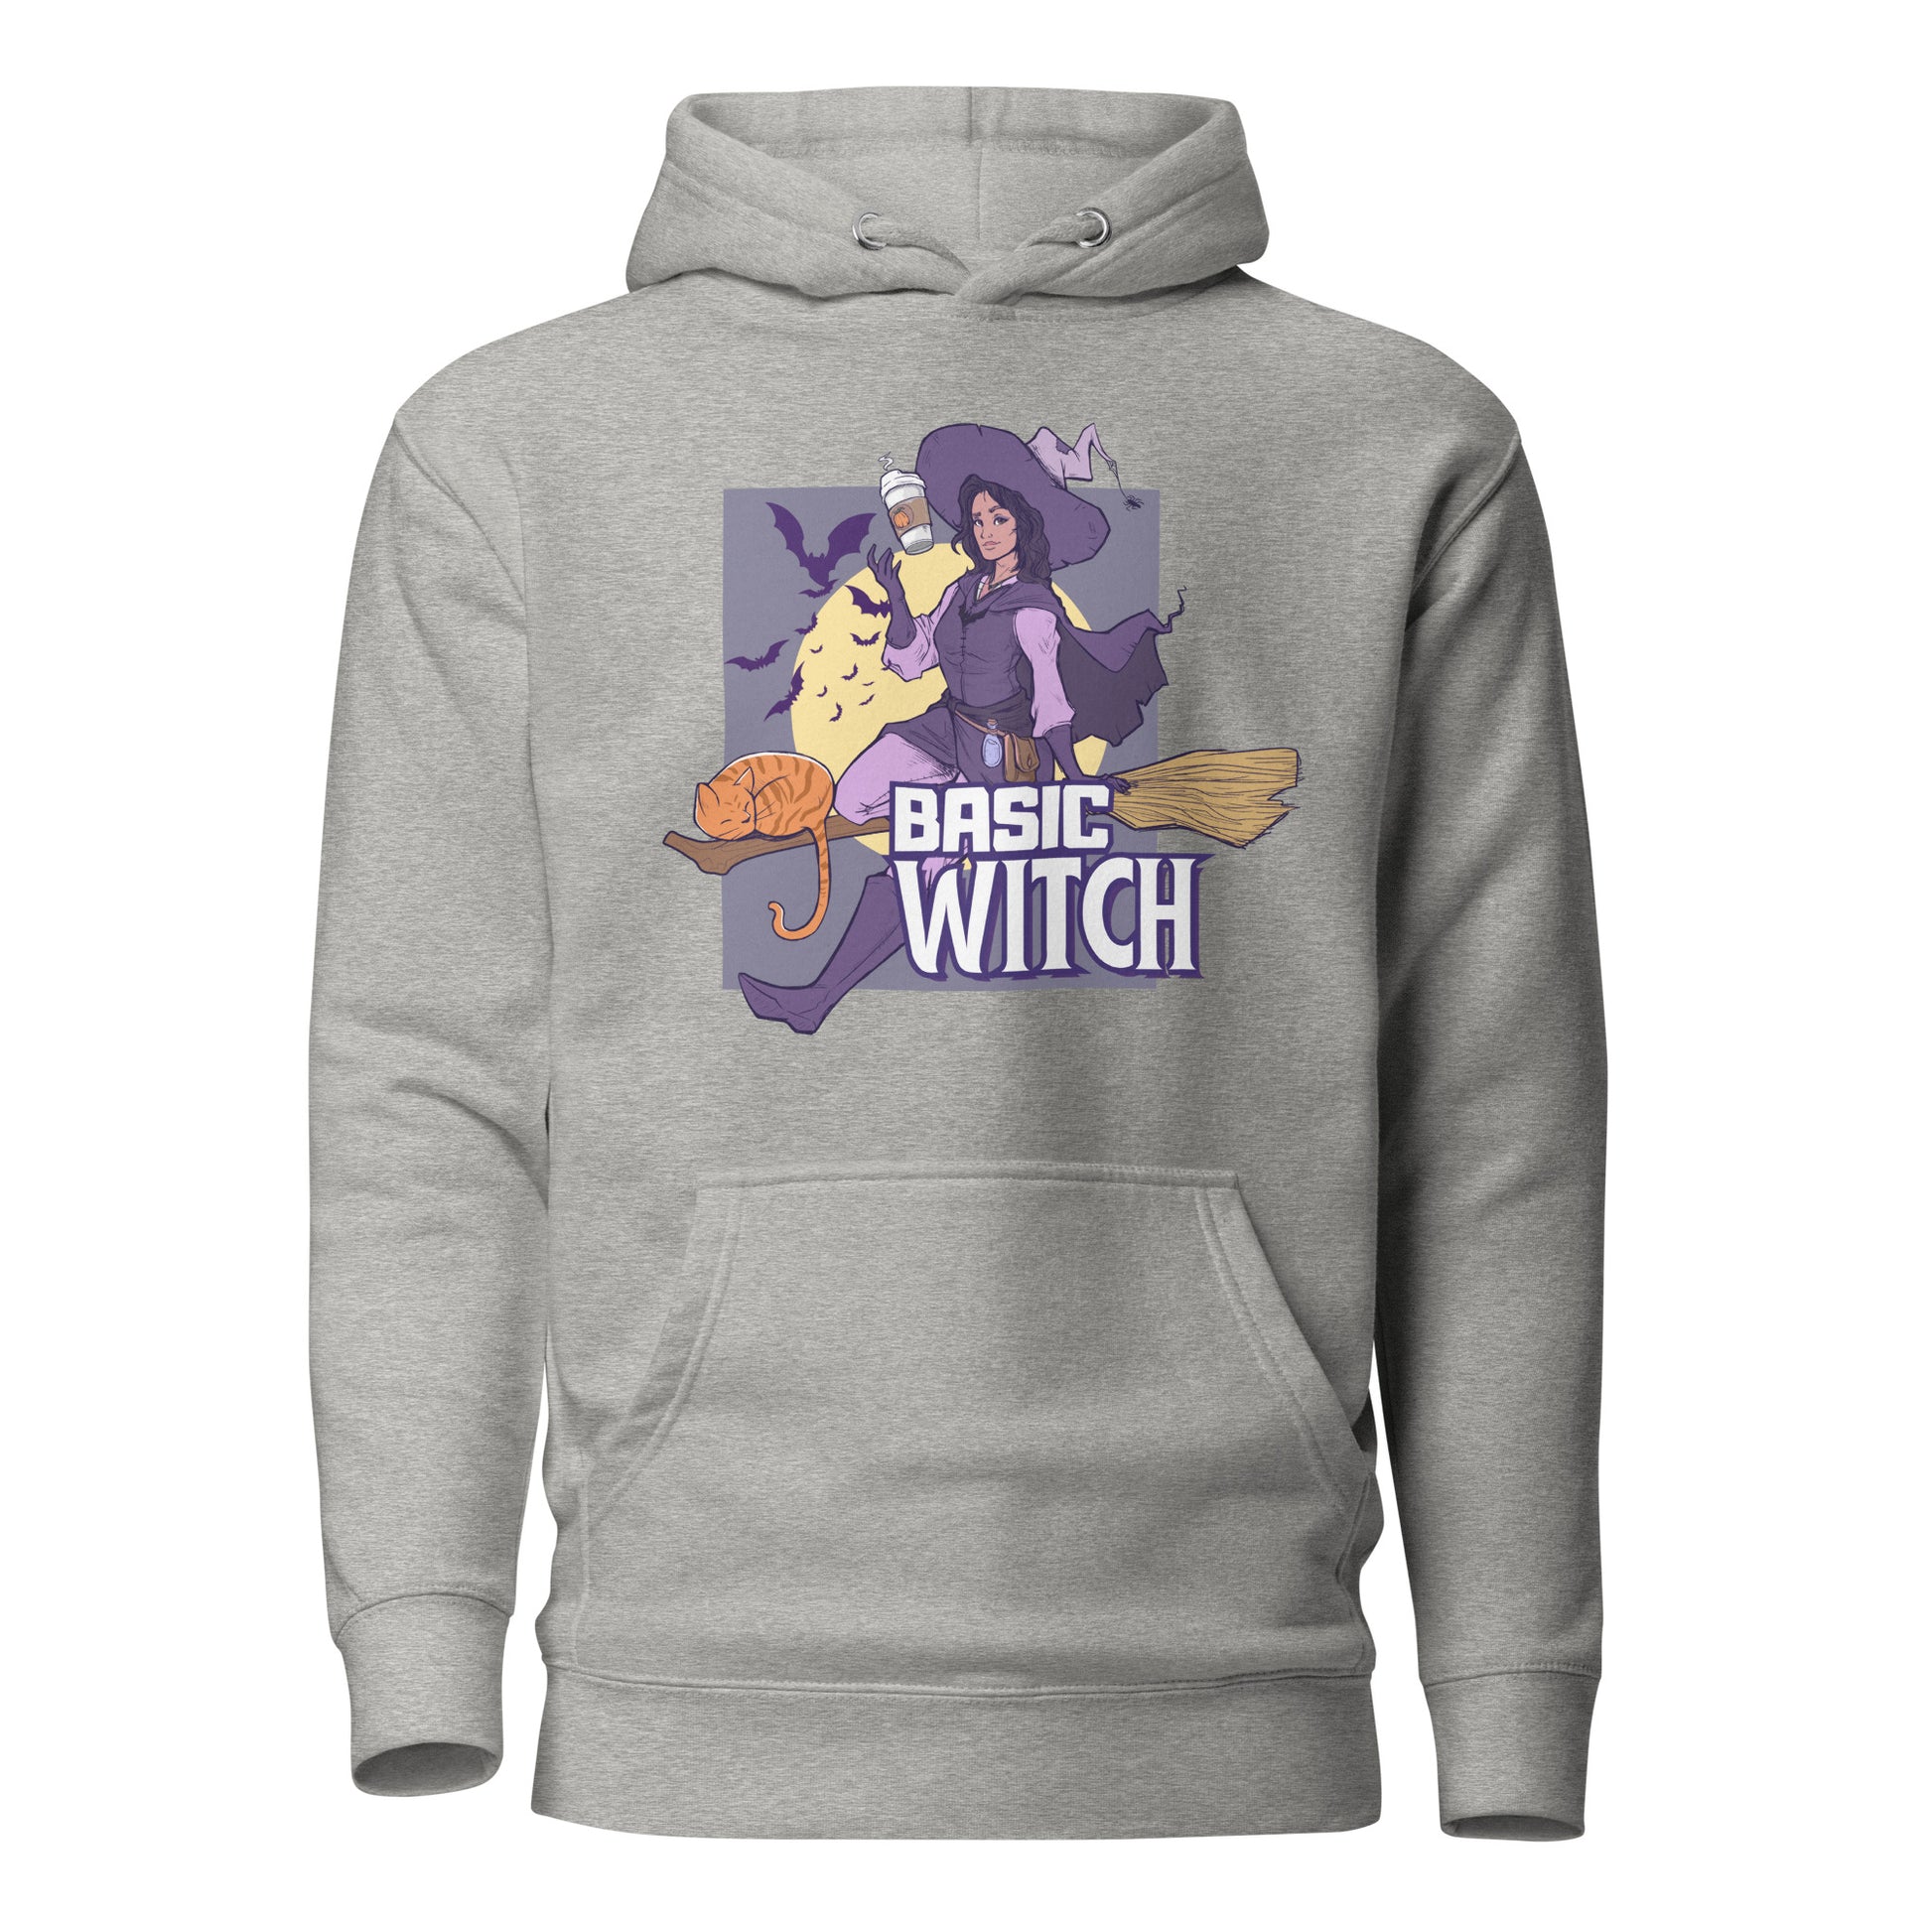 Basic Witch Unisex Hoodie  Level 1 Gamers Carbon Grey S 